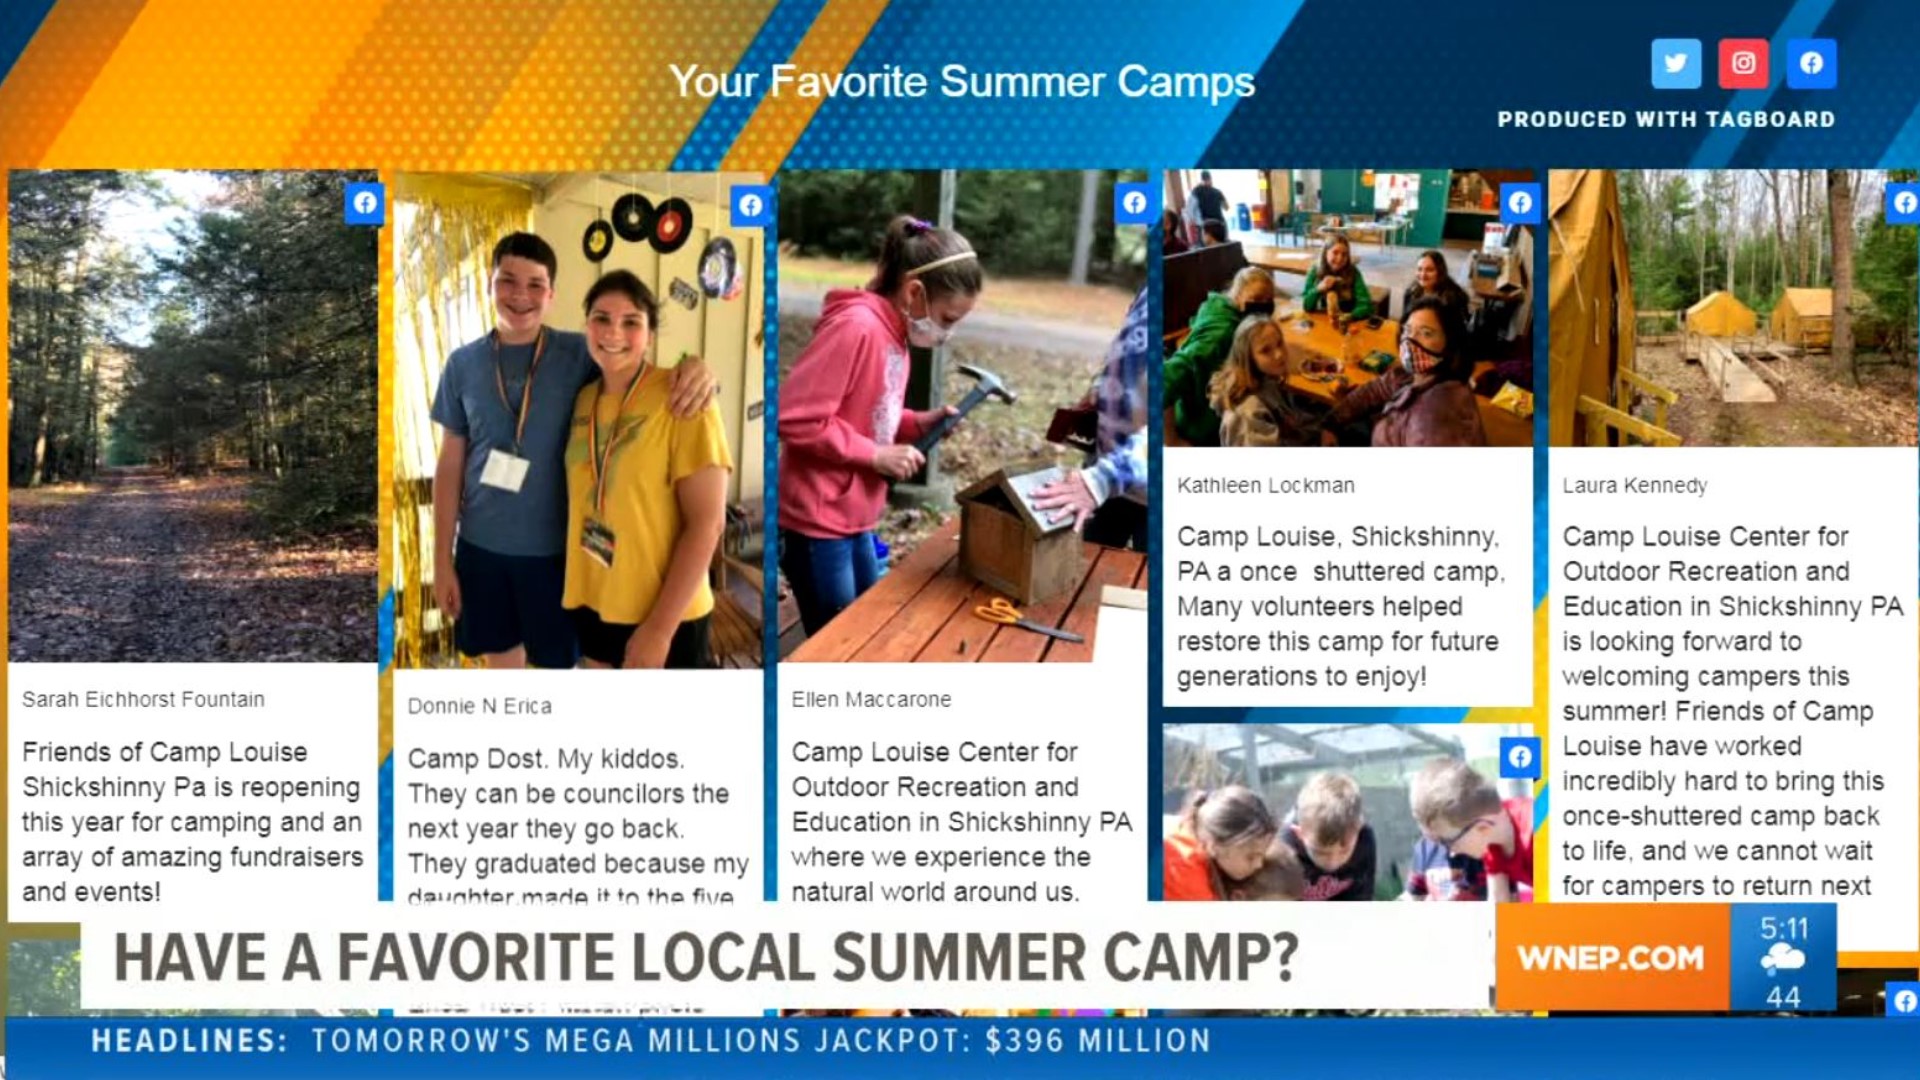 Newswatch 16’s Ryan Leckey shared some of your favorite summer camps in our area that you loved as a child or ones your kiddos love to attend.